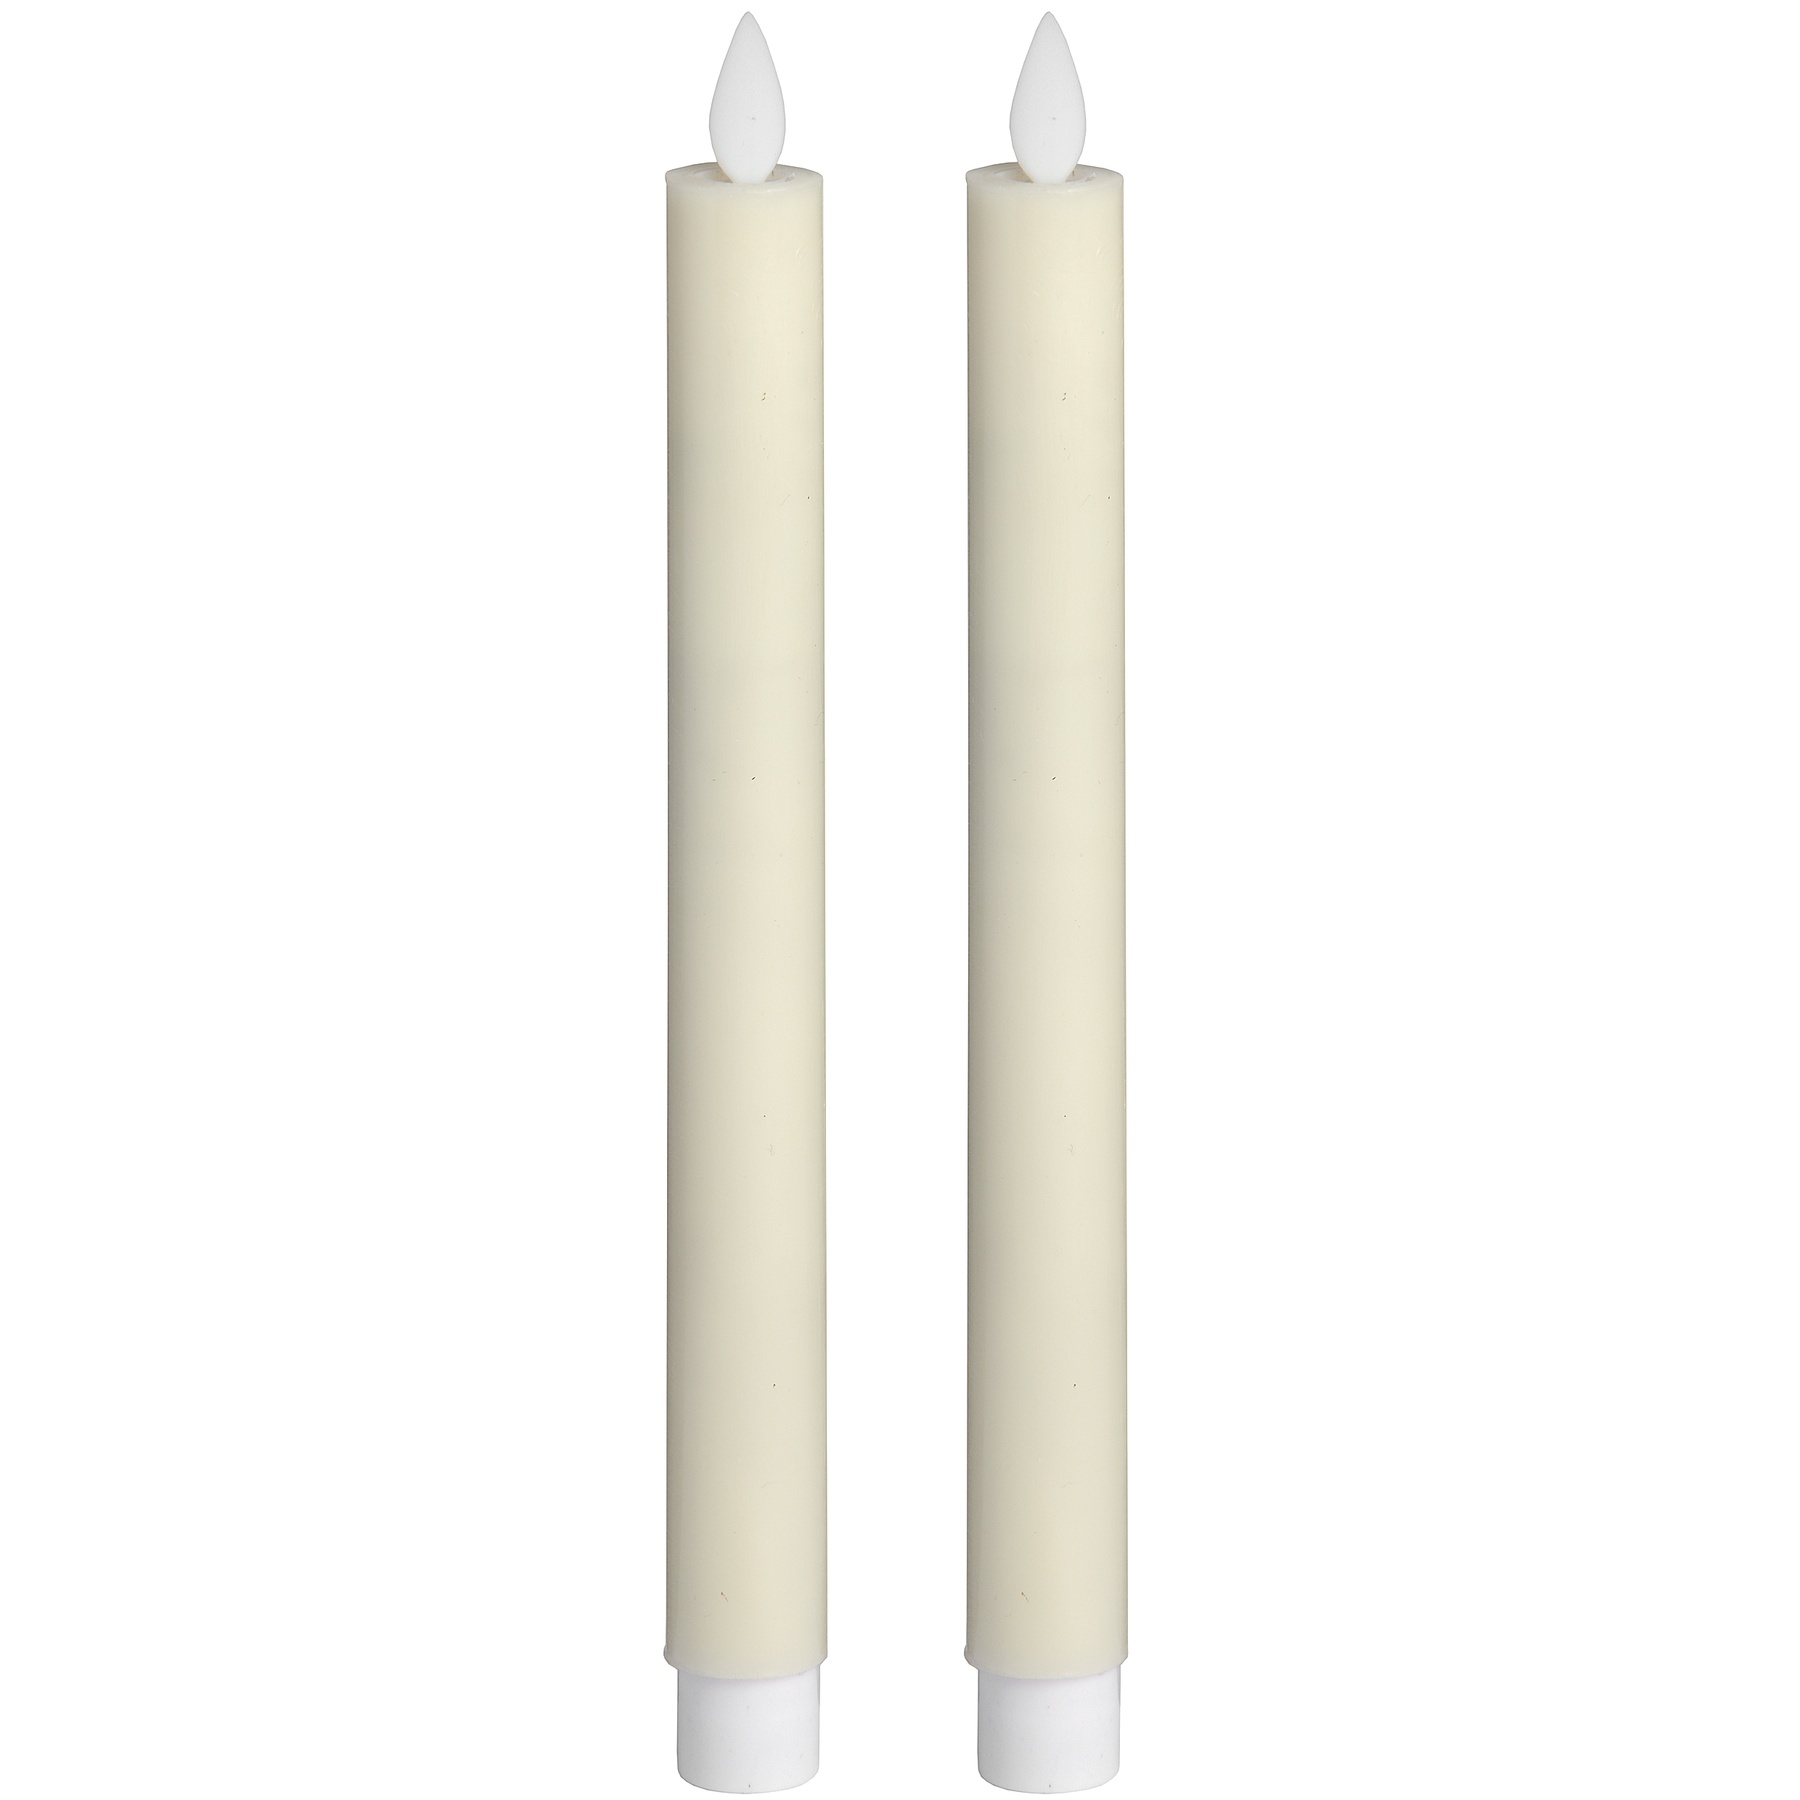 Pair Of Cream Luxe Flickering Flame LED Wax Dinner Candles - Image 1